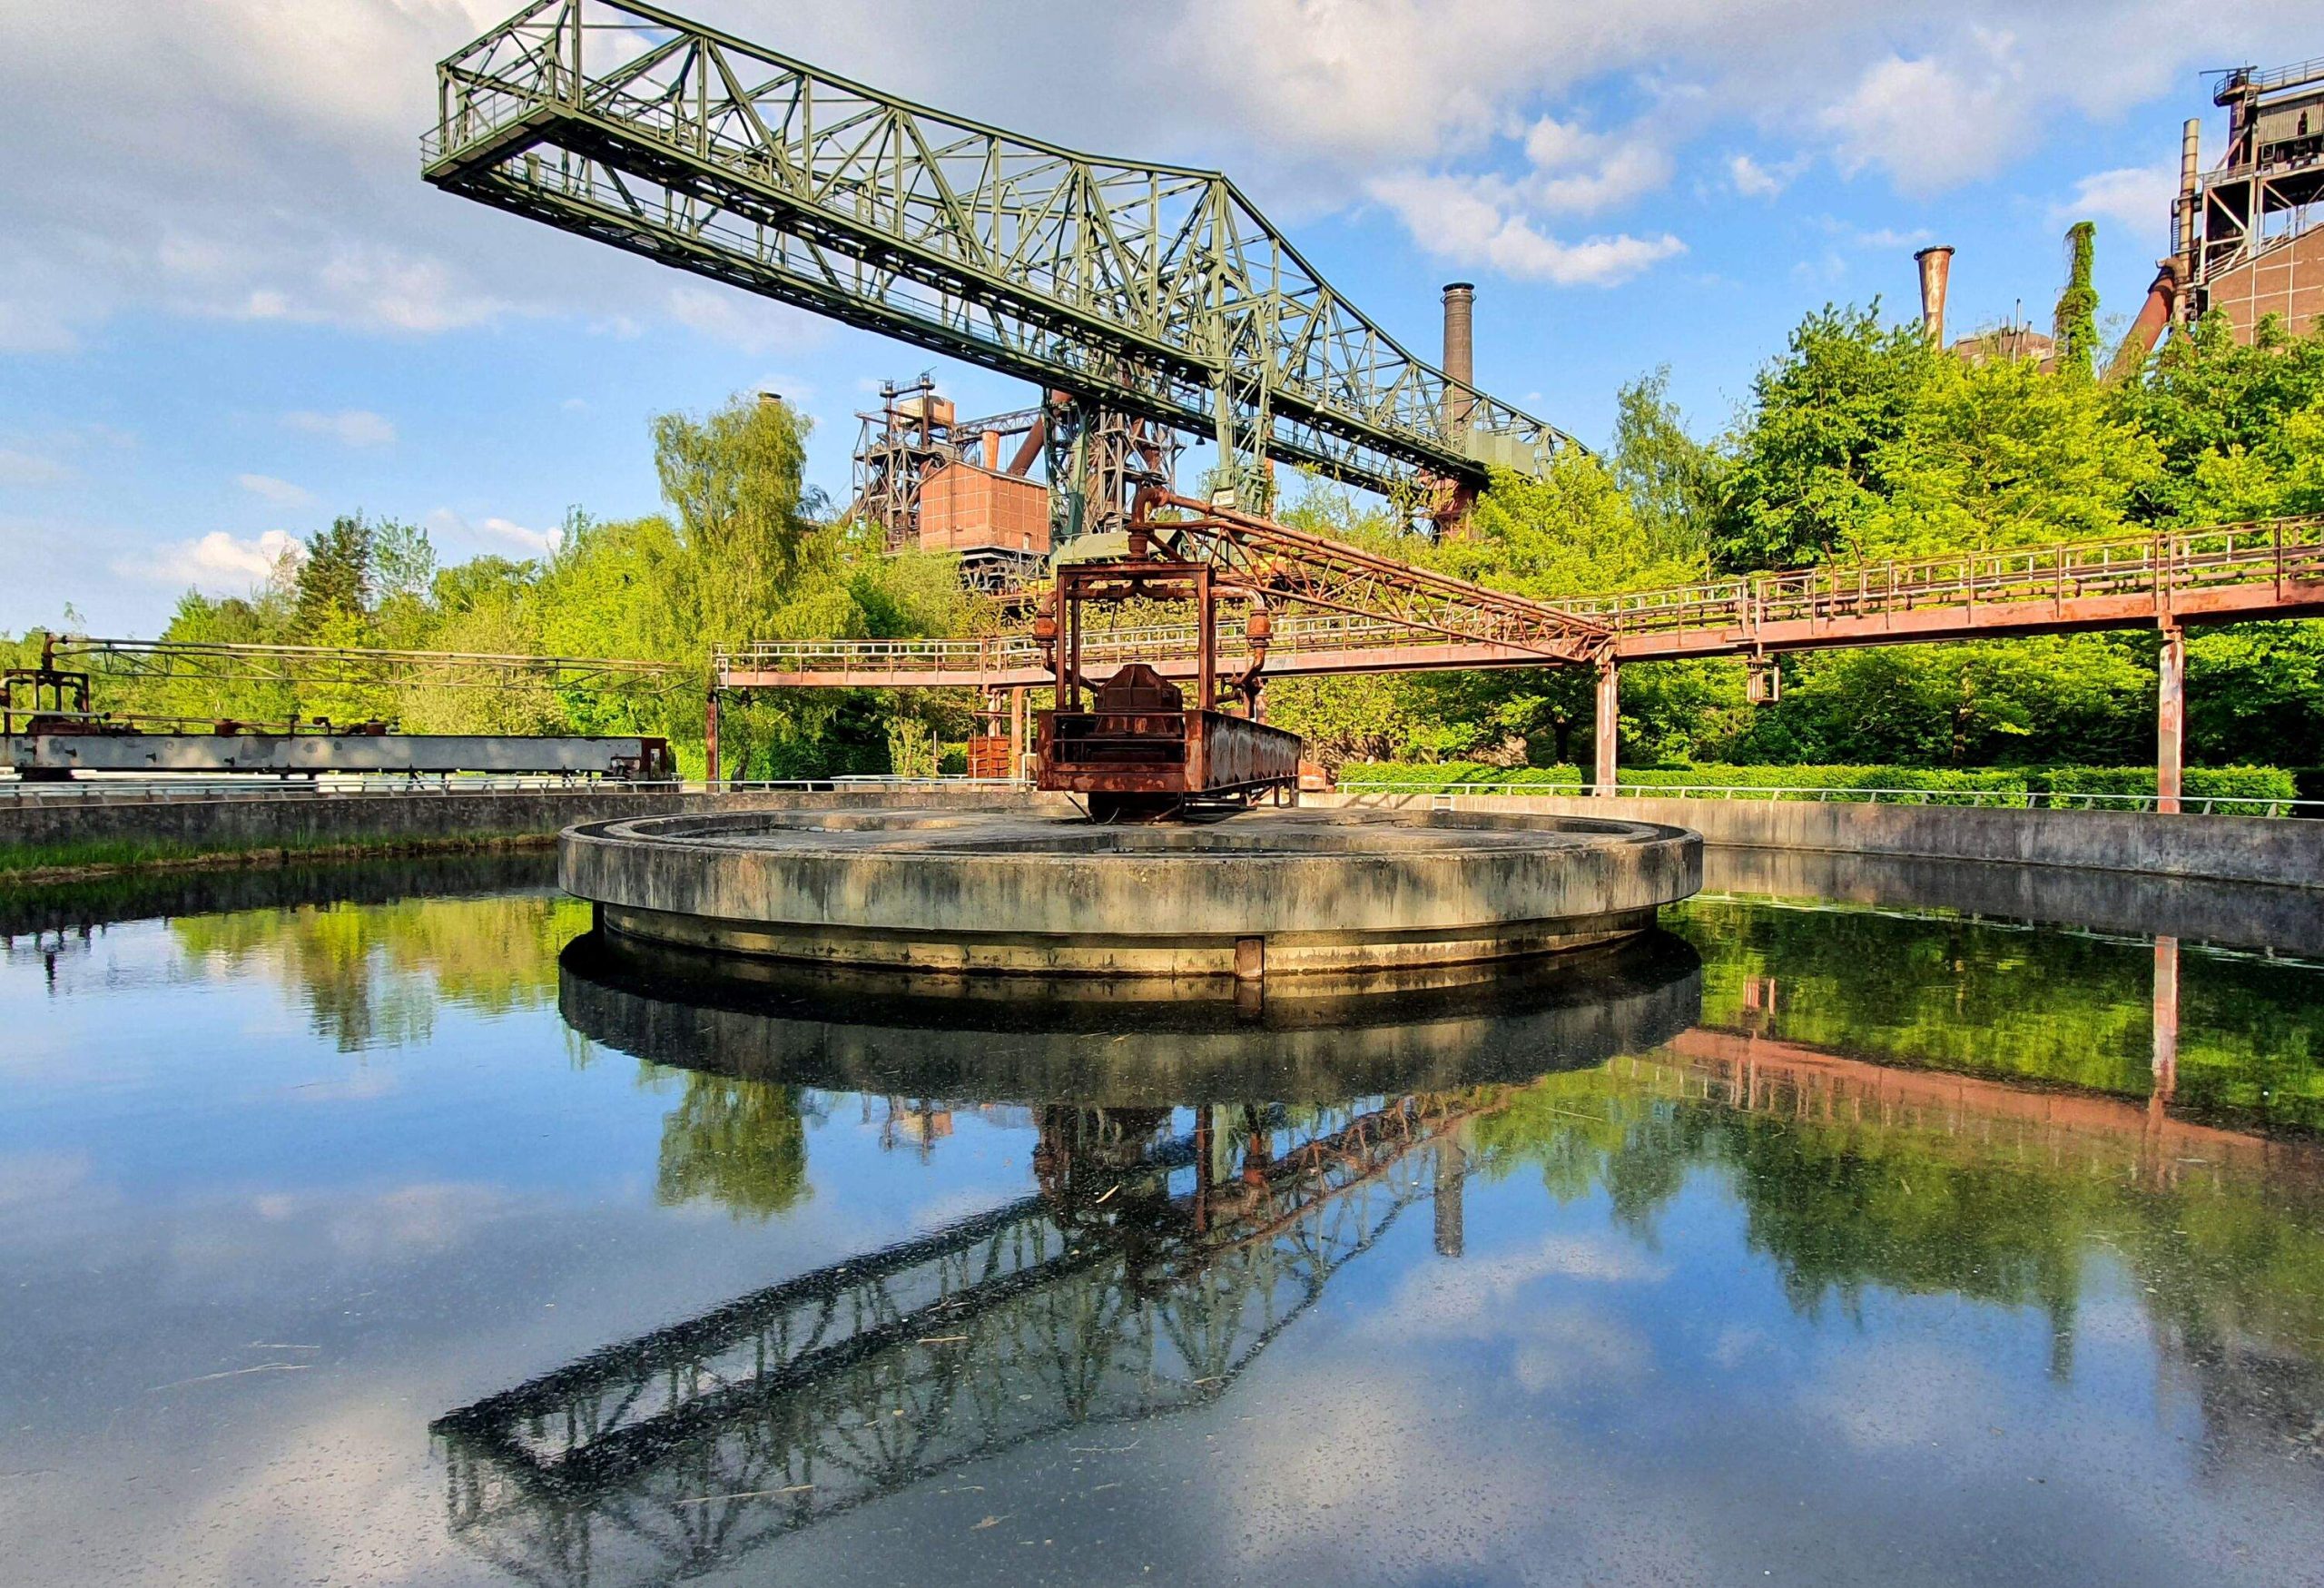 The ore loading bridge (''The crocodile'') with reflection in the clarifier in the Duisburg Landscape Park (Landschaftspark Duisburg-Nord)..The blast furnace complex was built in 1902. It was badly damaged during World War II, but was rebuilt in the 1950s. In 1985 the blast furnaces in the complex was not profitable anymore . and the complex was closed. Between 1991 and 2002 the site was converted into a public park.